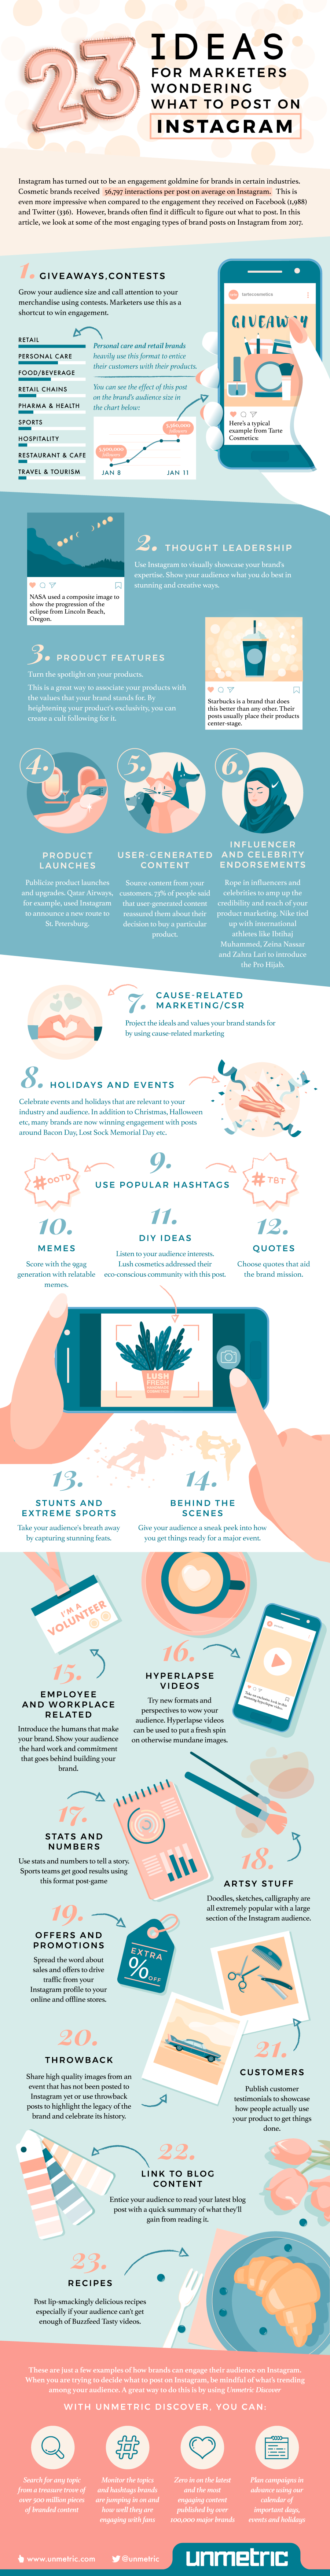 23 Ideas for Marketers Wondering What to Post on Instagram